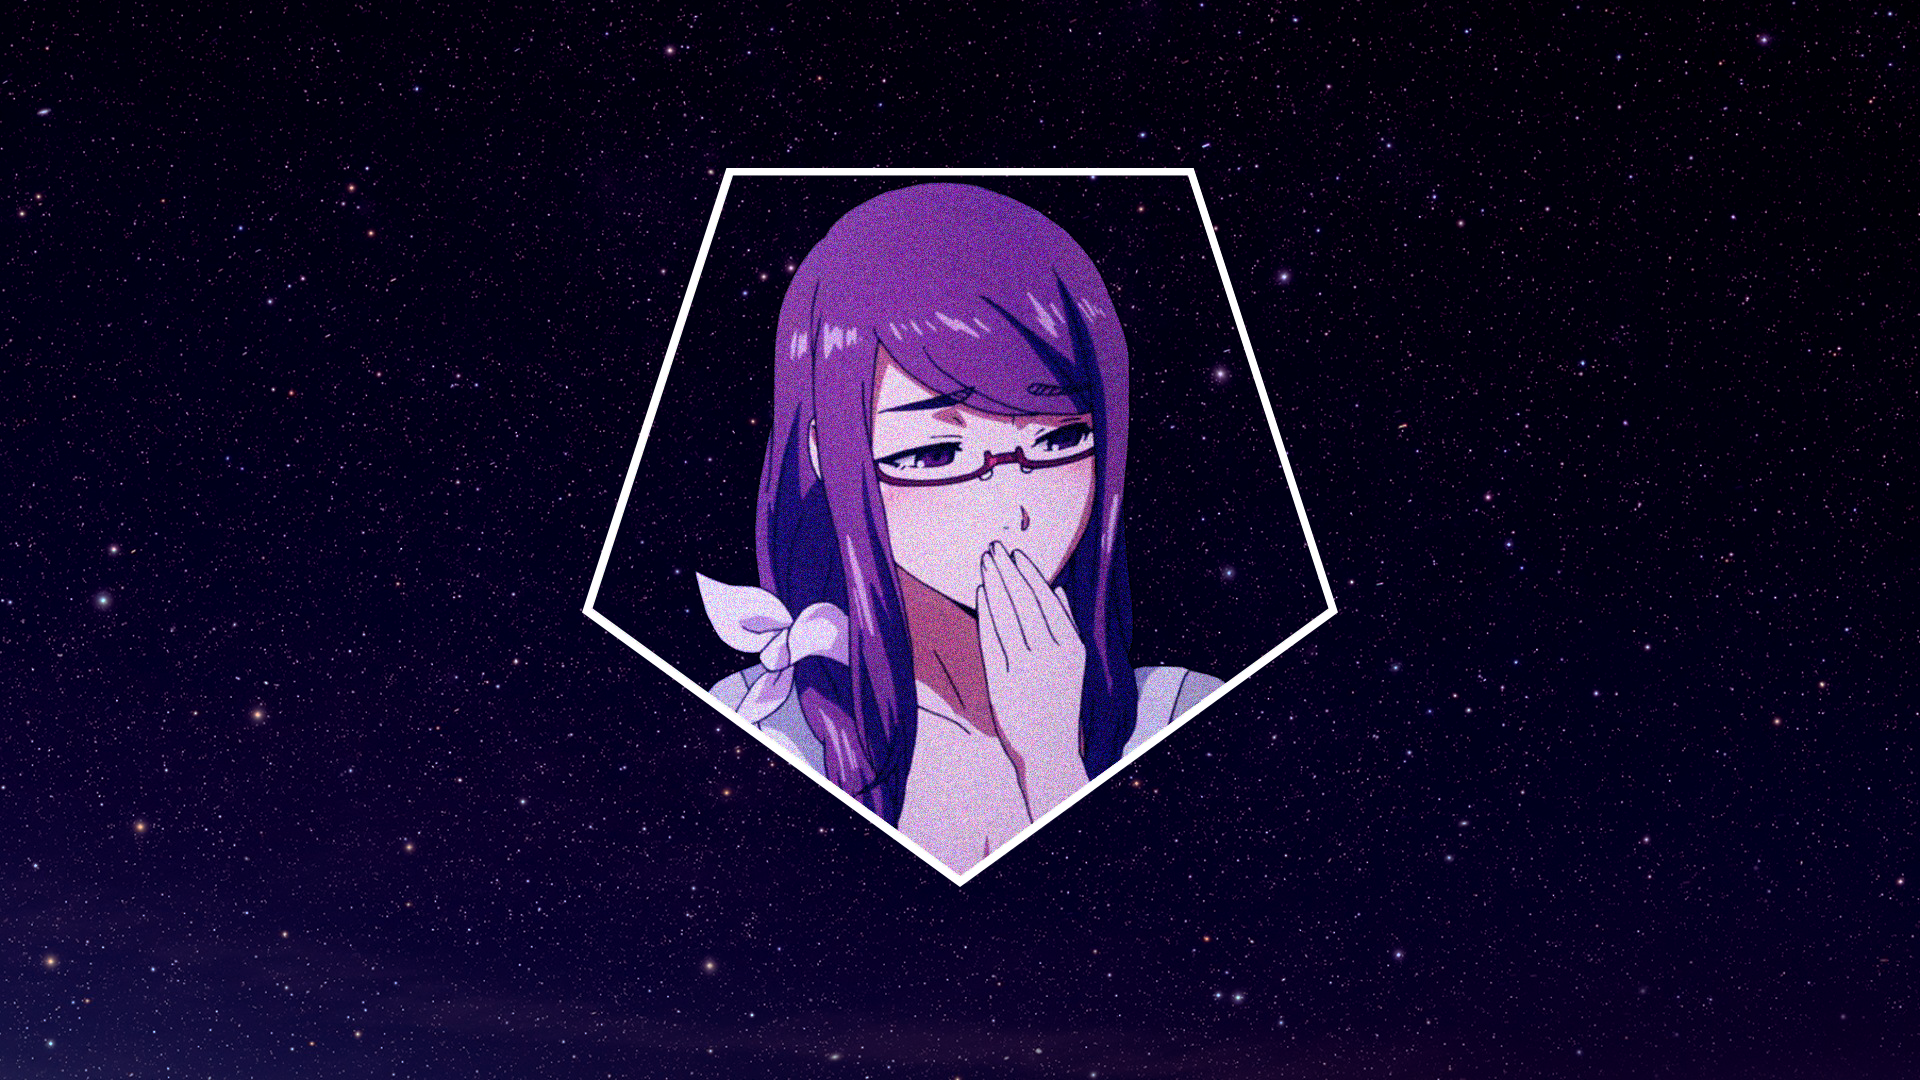 Anime 1920x1080 Kamishiro Rize night sky Tokyo Ghoul picture-in-picture